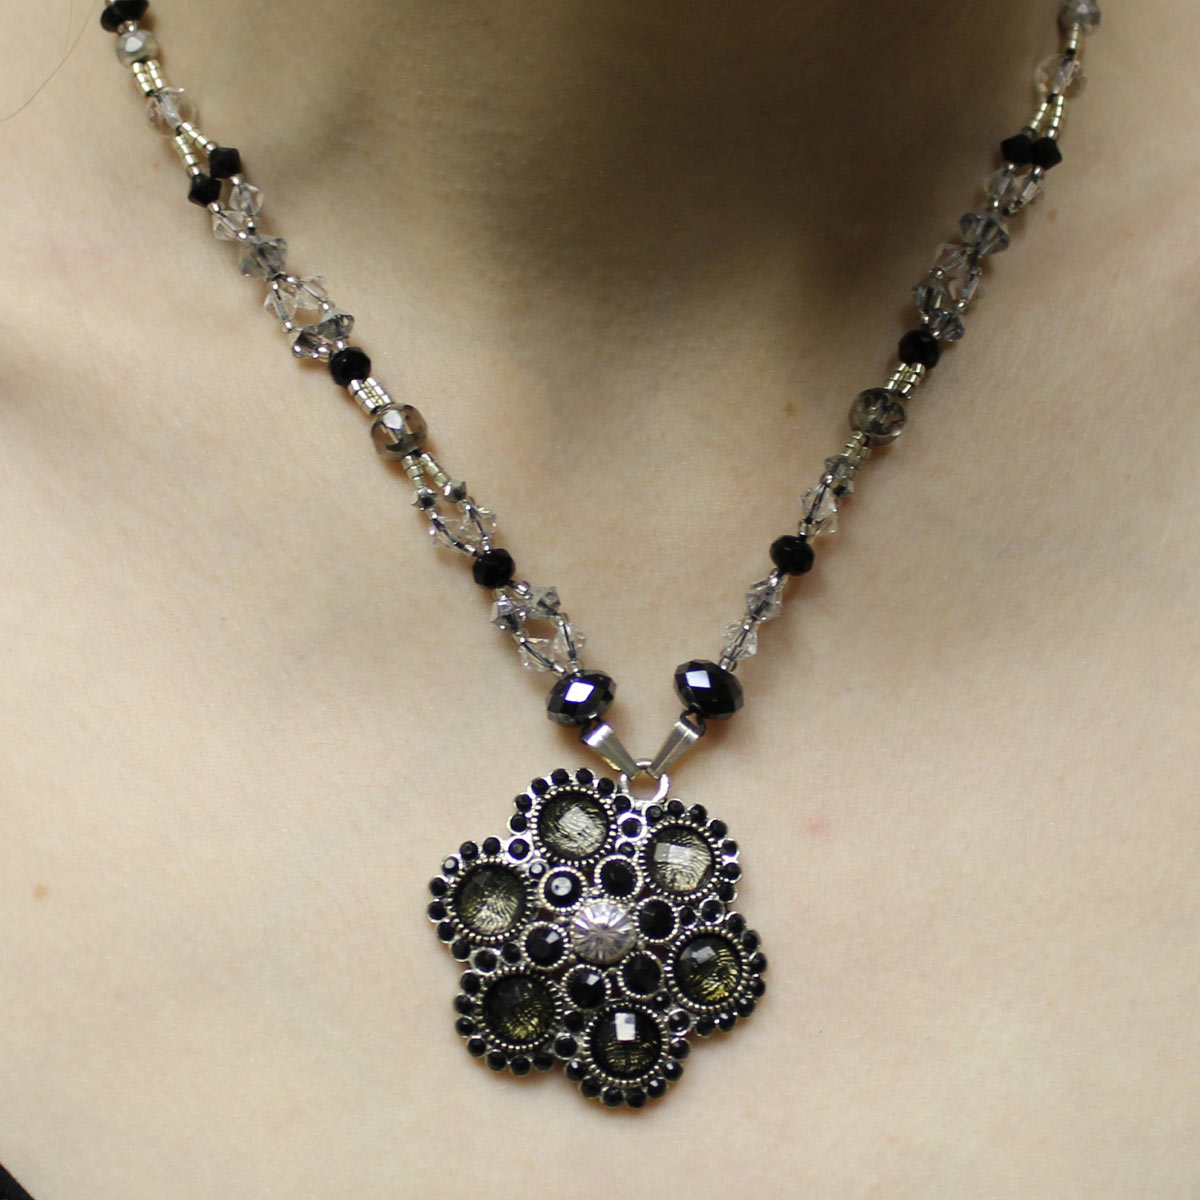 statement necklace, flower center bead, crystal flower bead, hematite crystals, silver accents necklace, statement jewelry